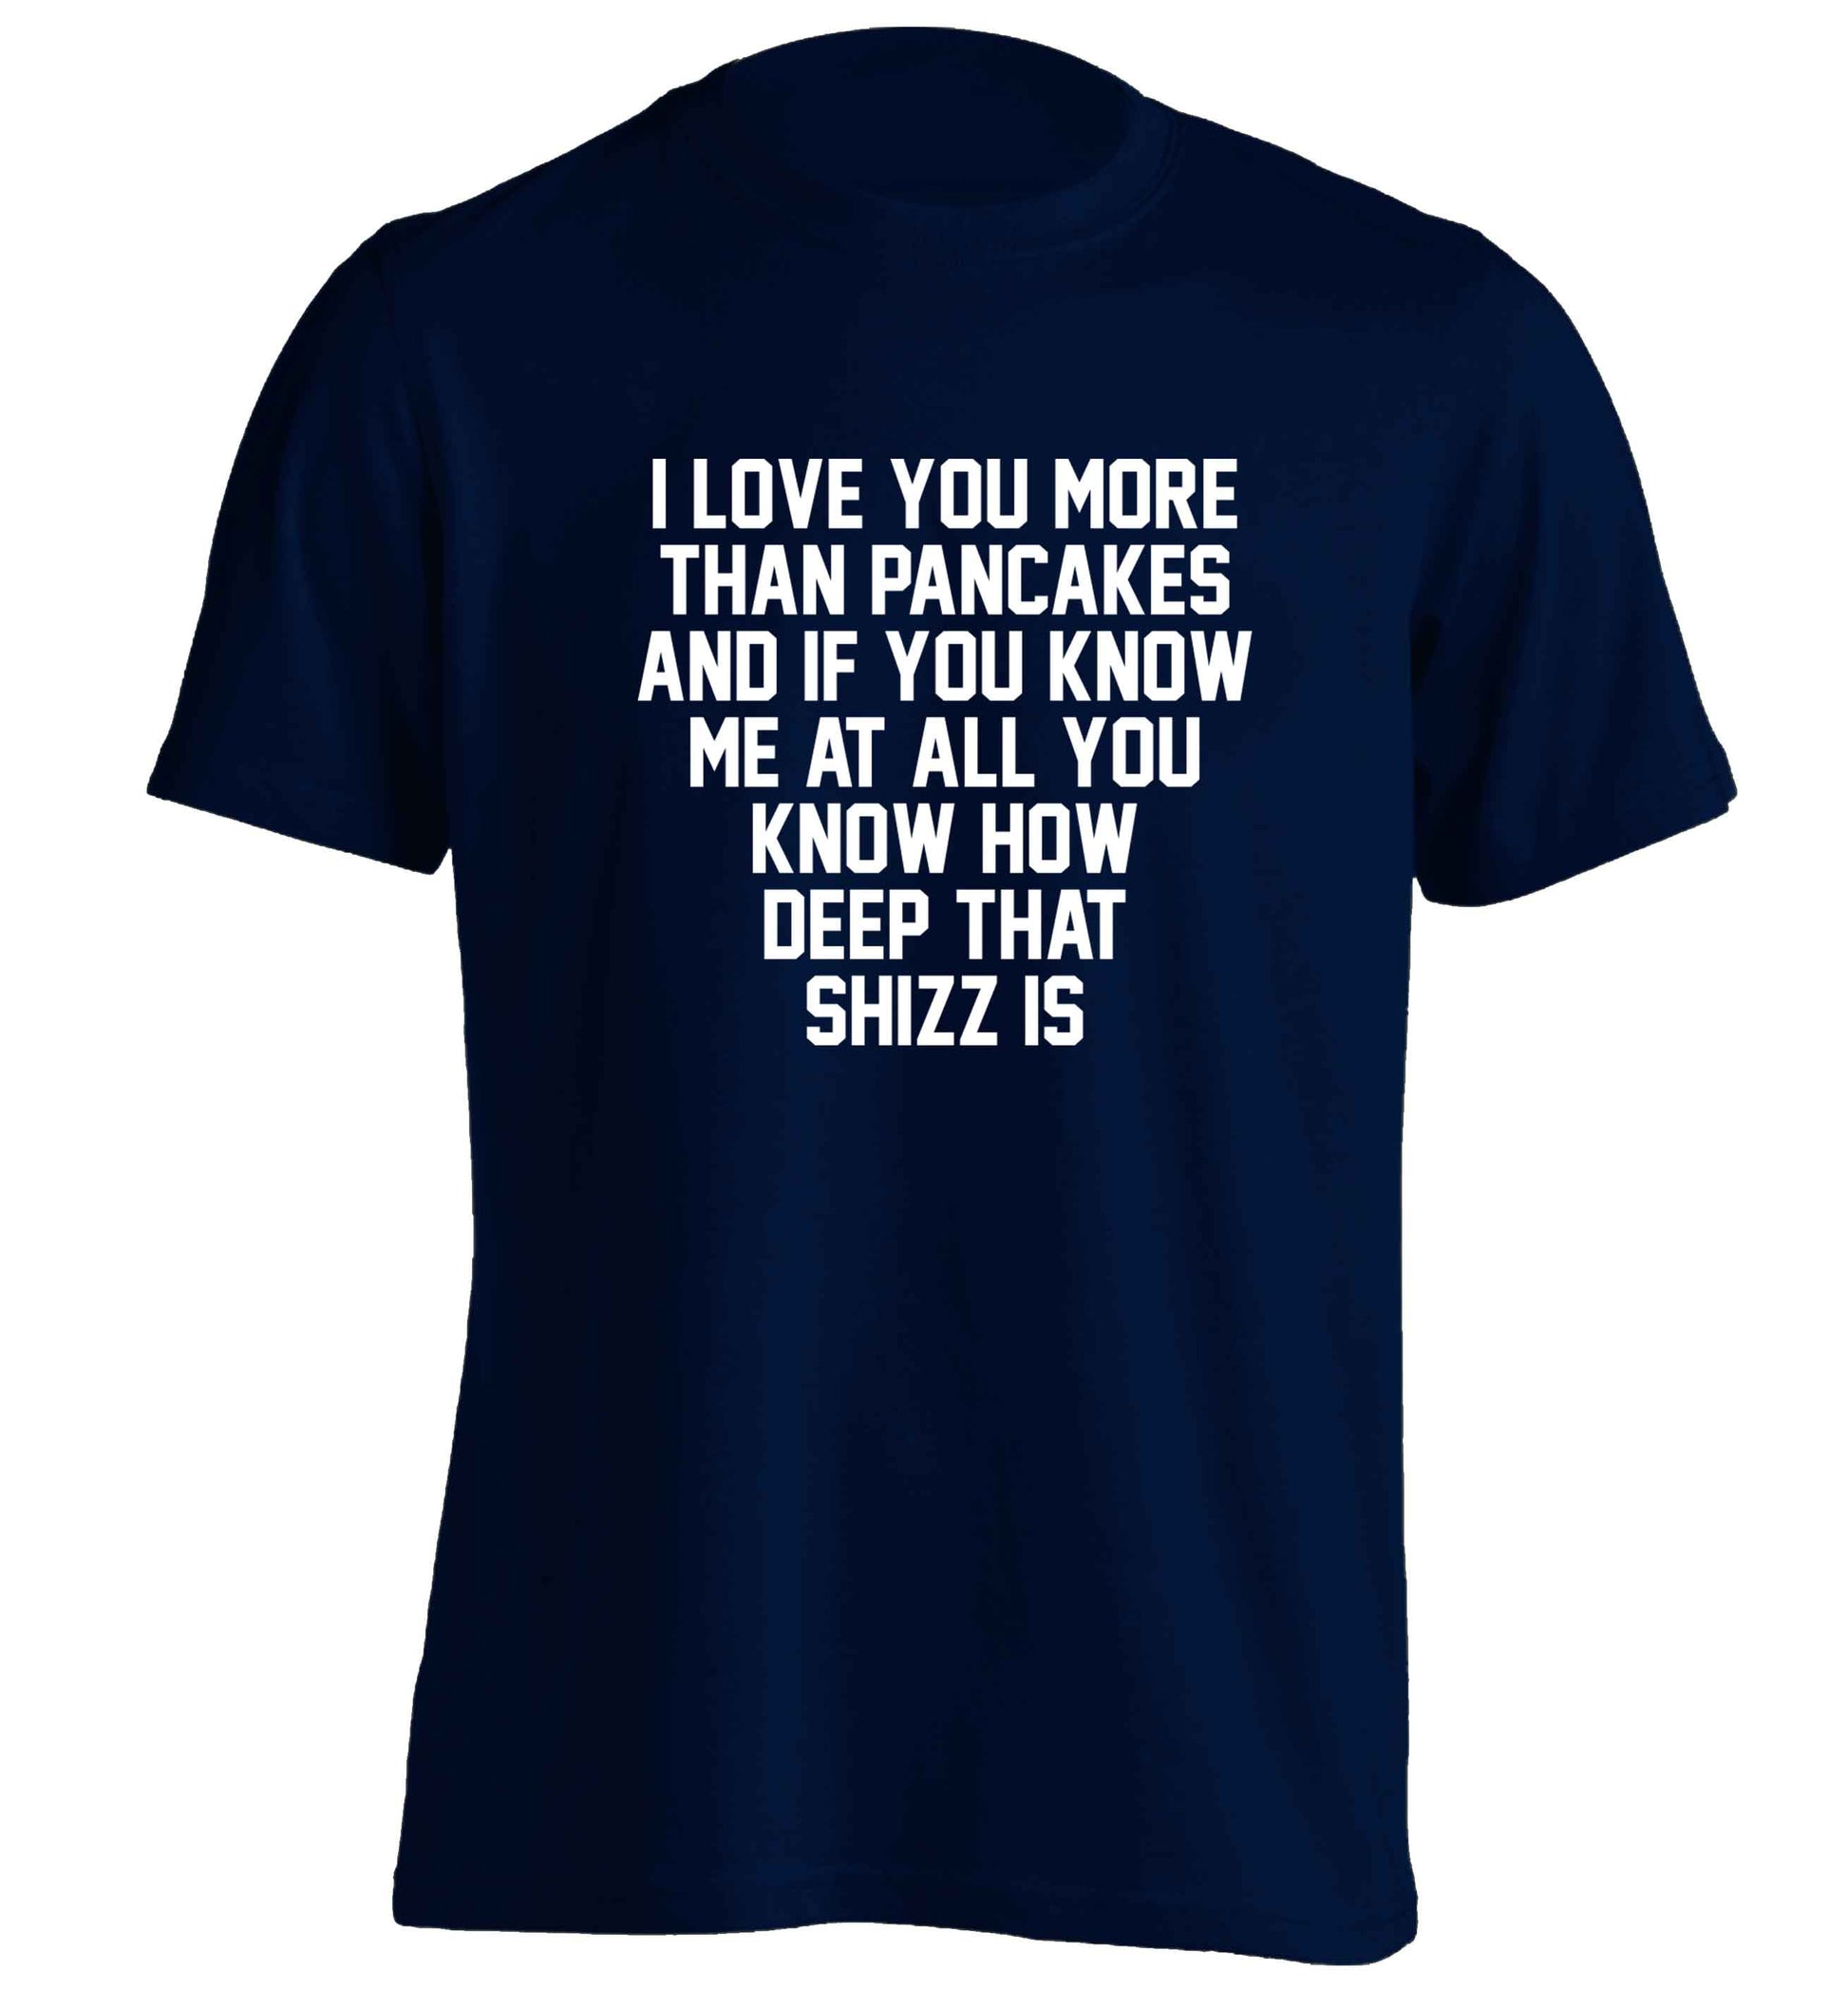 I love you more than pancakes and if you know me at all you know how deep that shizz is adults unisex navy Tshirt 2XL